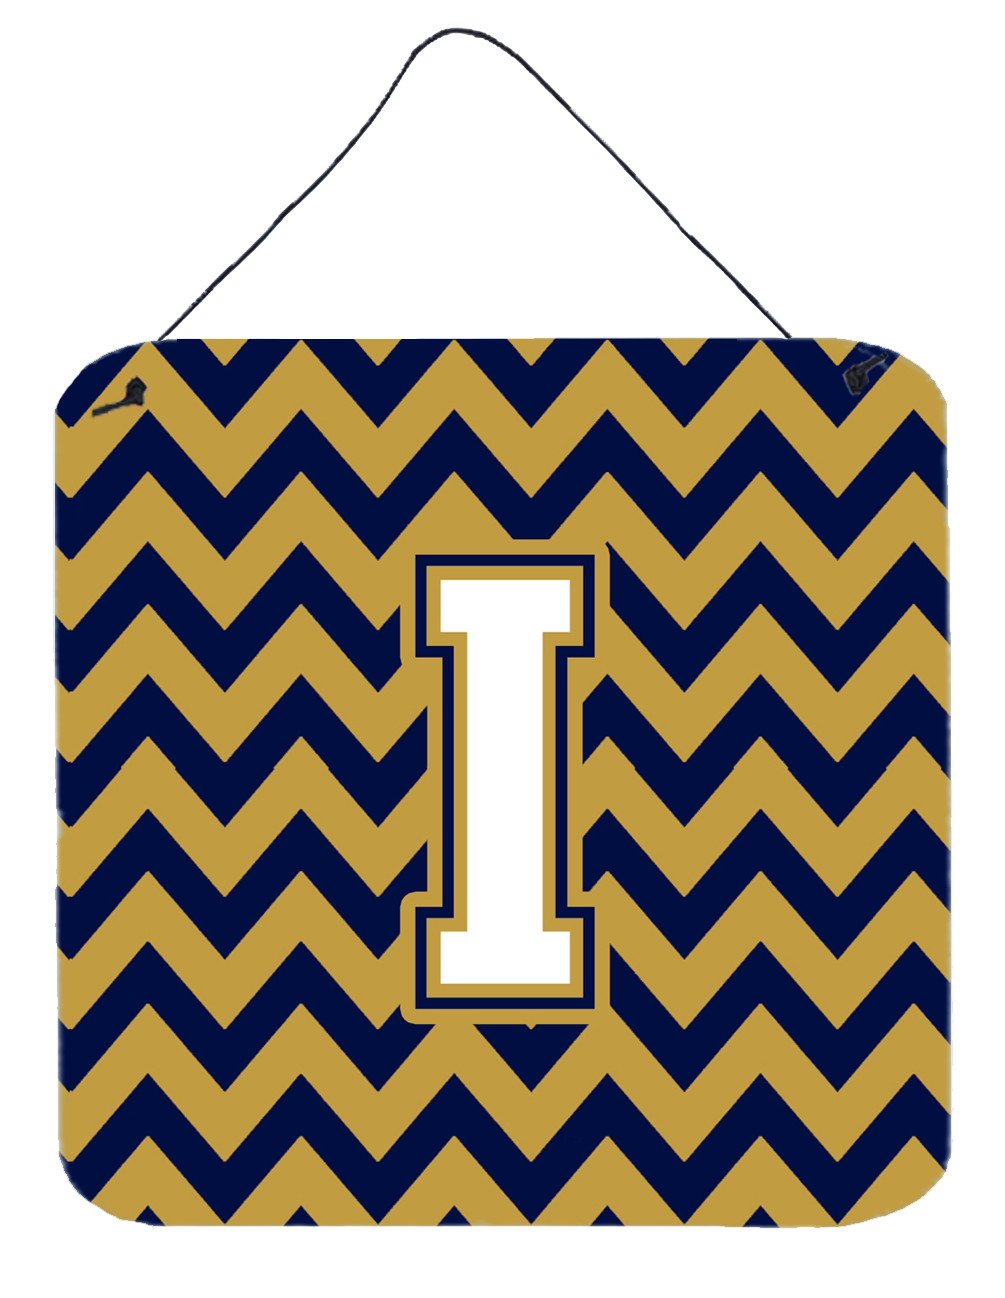 Letter I Chevron Navy Blue and Gold Wall or Door Hanging Prints CJ1057-IDS66 by Caroline's Treasures